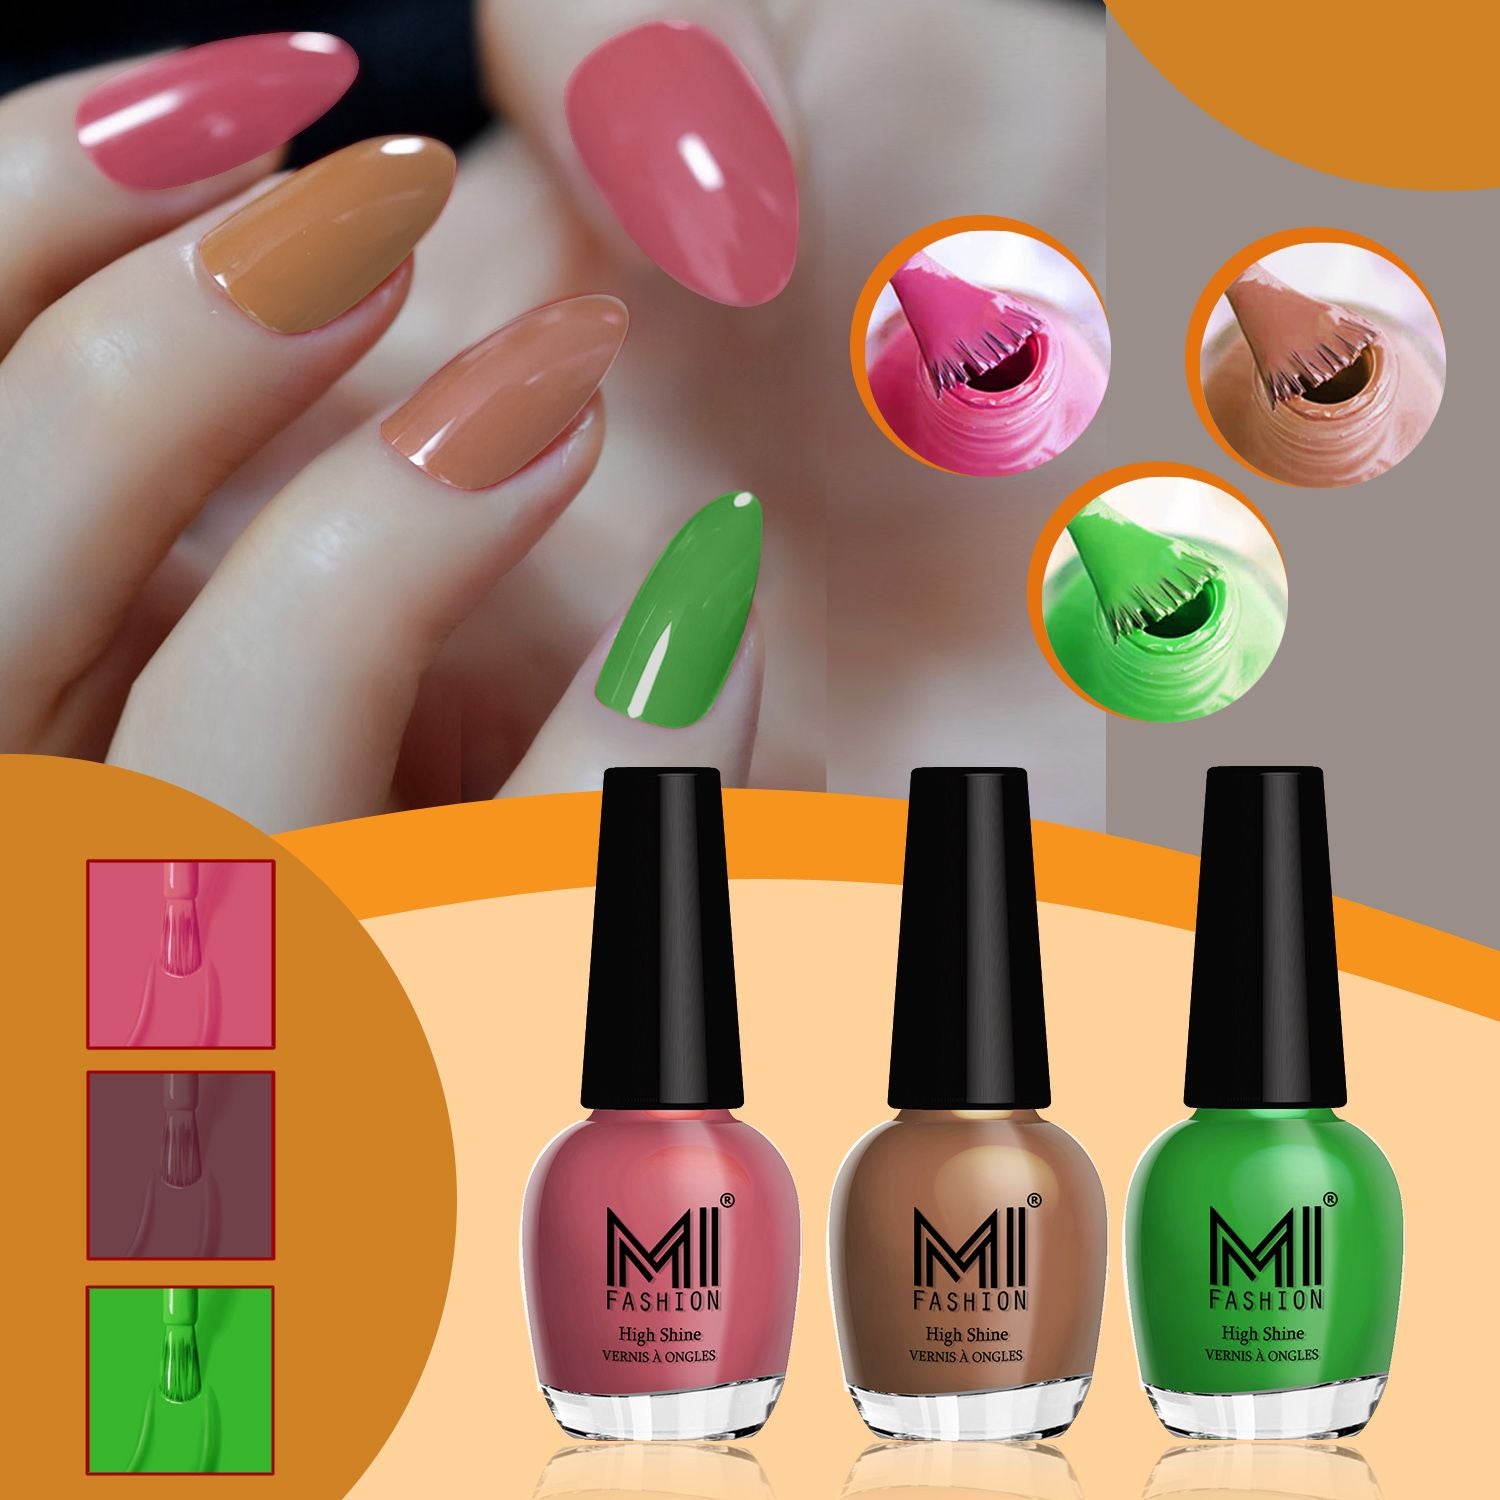 MI Fashion Nail Polish With Radiant Shine And High Defination Which Remains Long-Lasting Pack of 3 (15ML each)(TAN,Dark Nude,Grass Green)